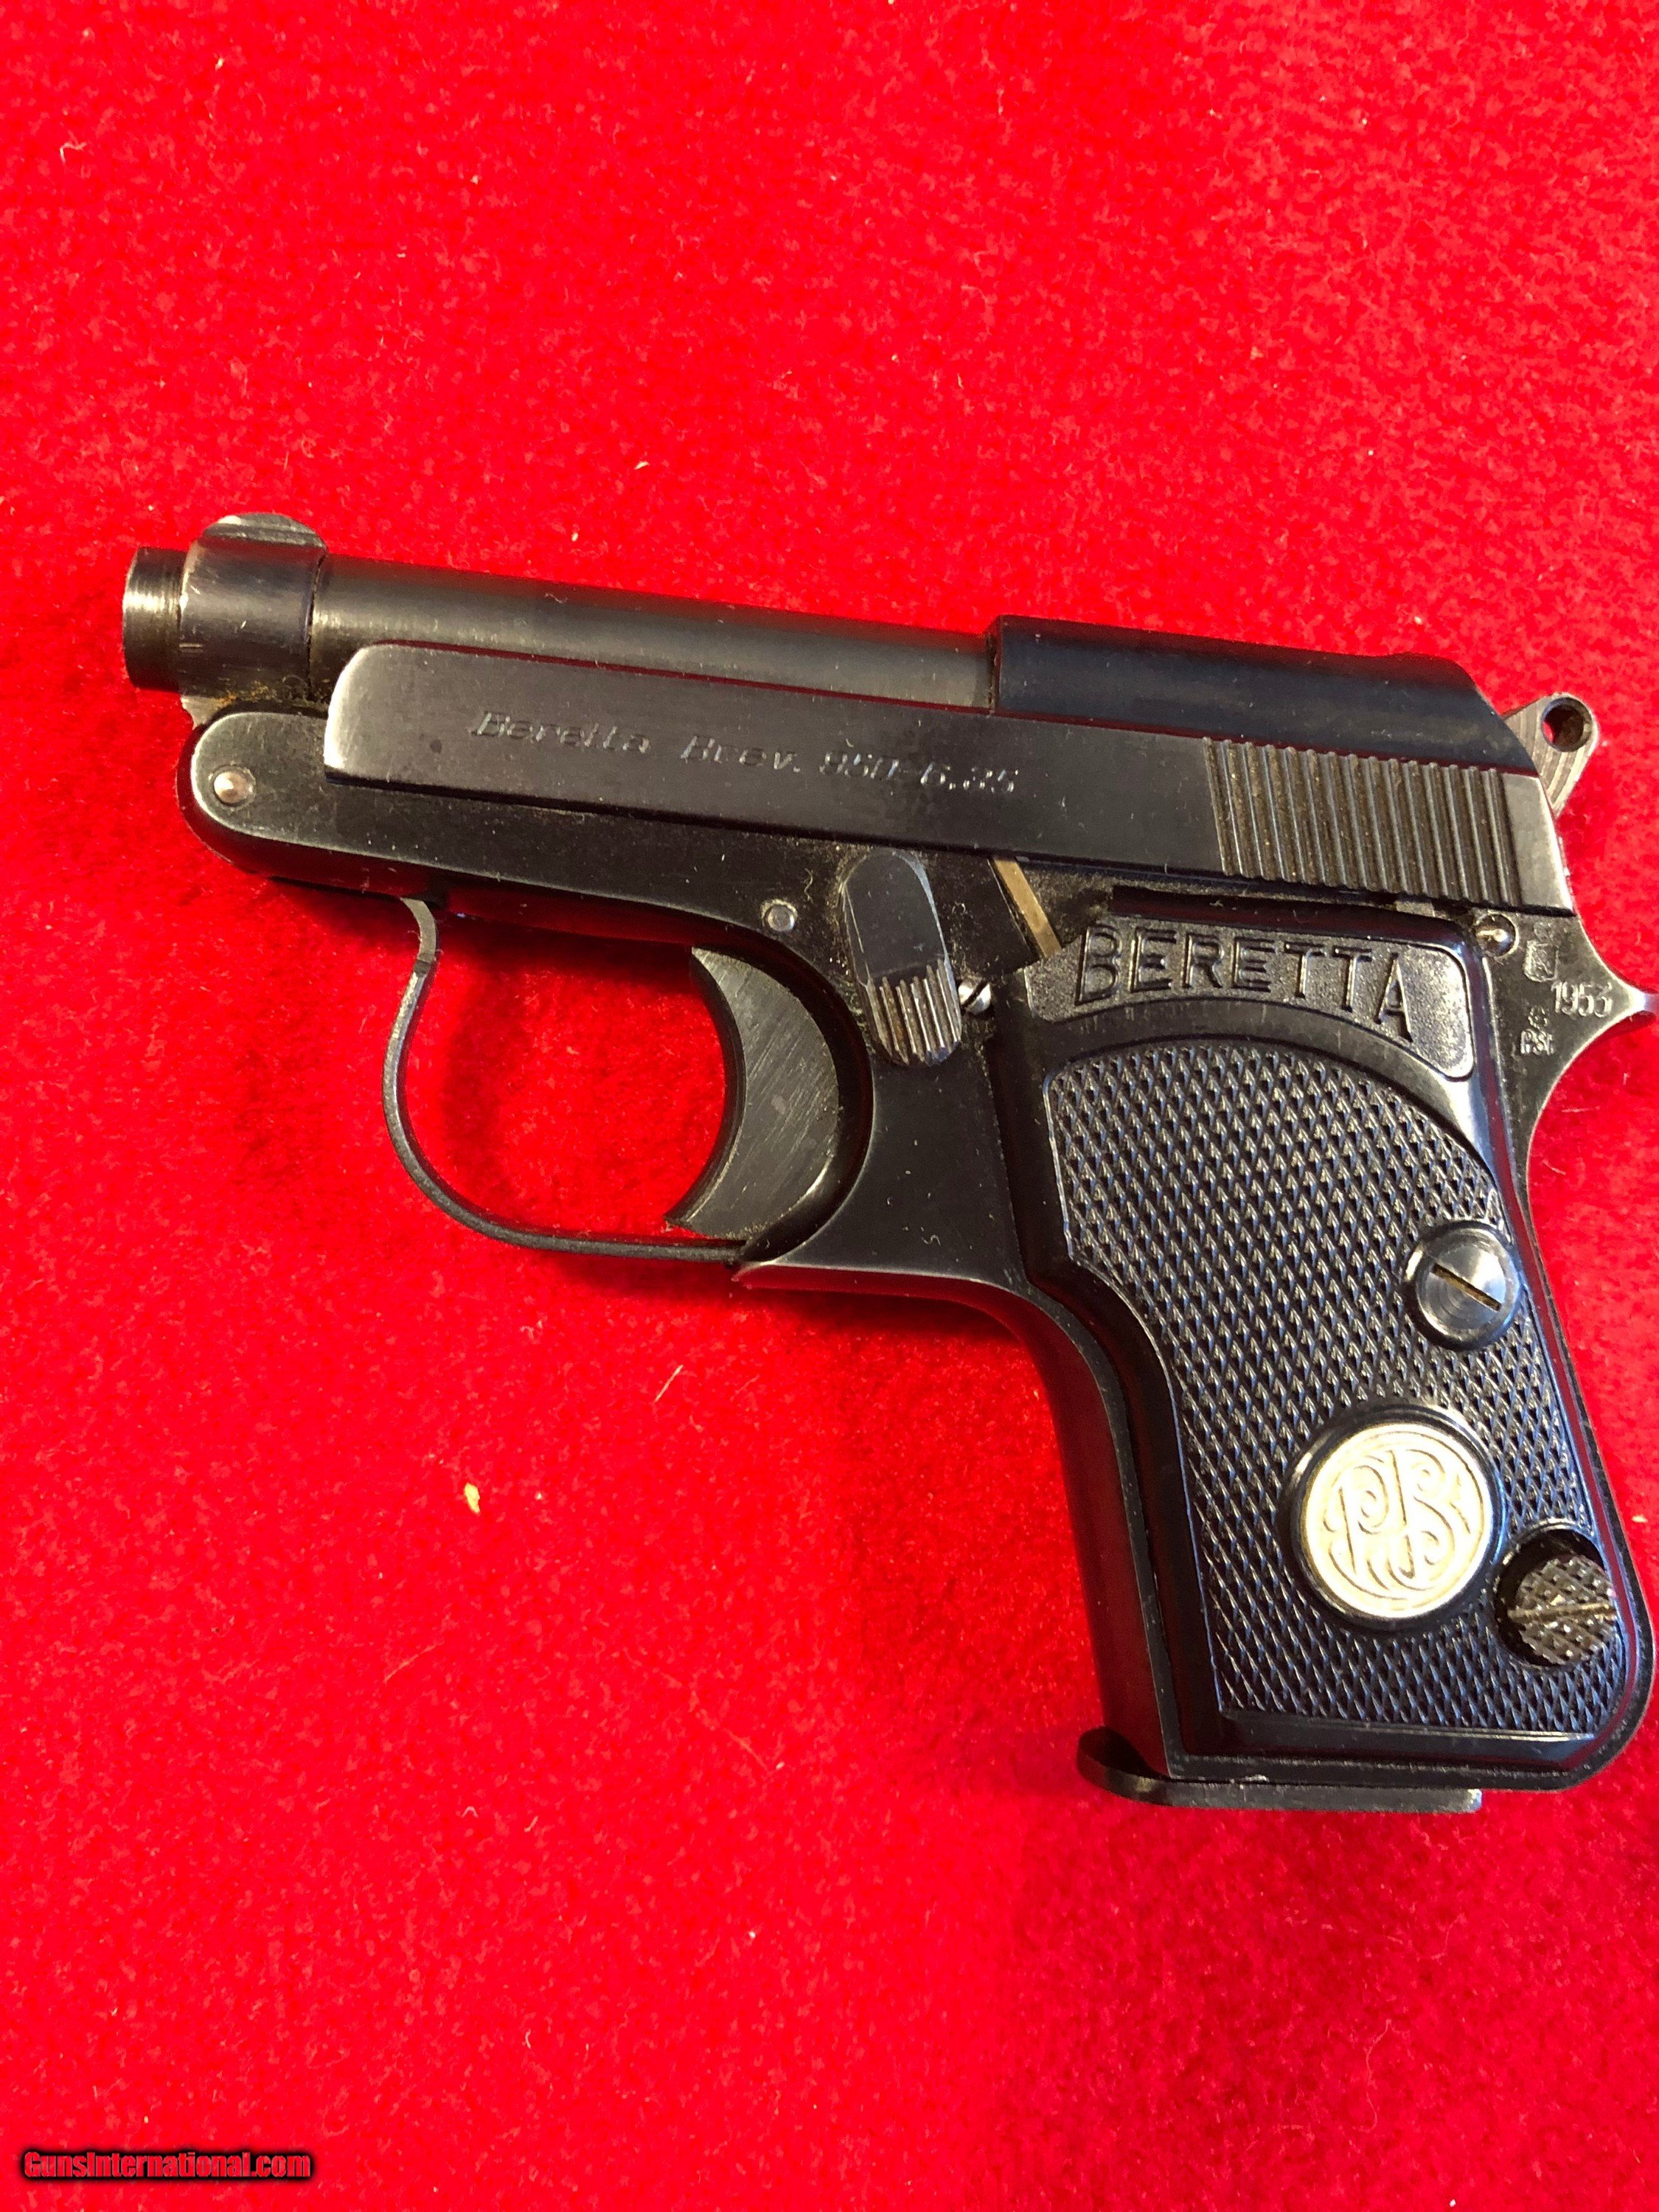 Beretta 950 Pistol In 635mm 25 Acp Excellent Condition Early